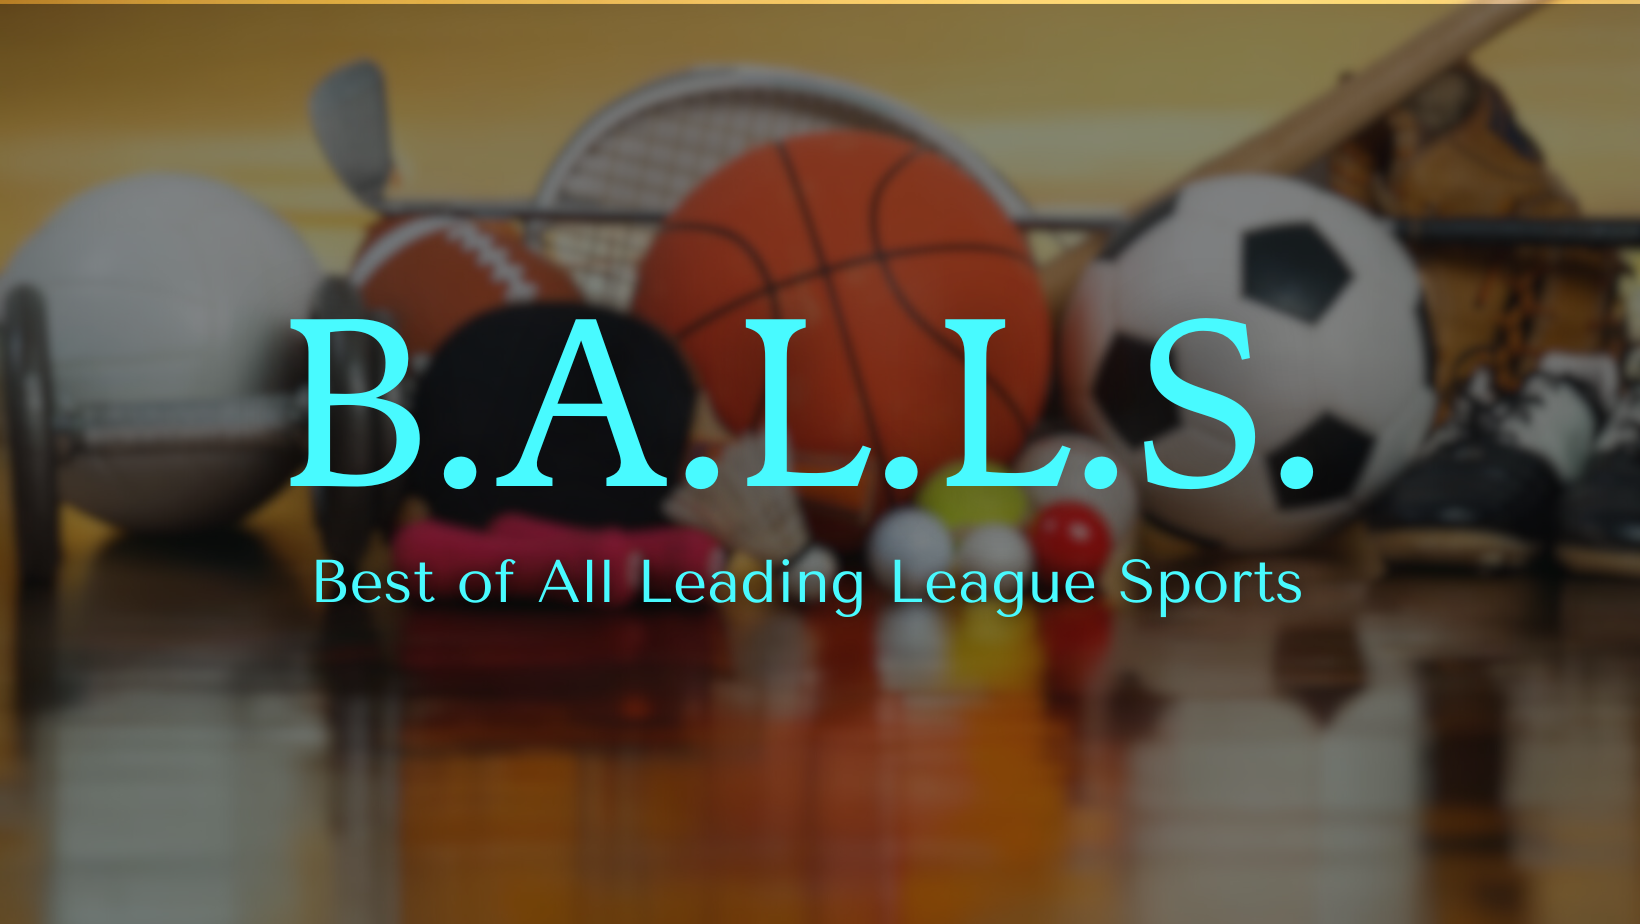 B.A.L.L.S. (Best of All Leading League Sports)